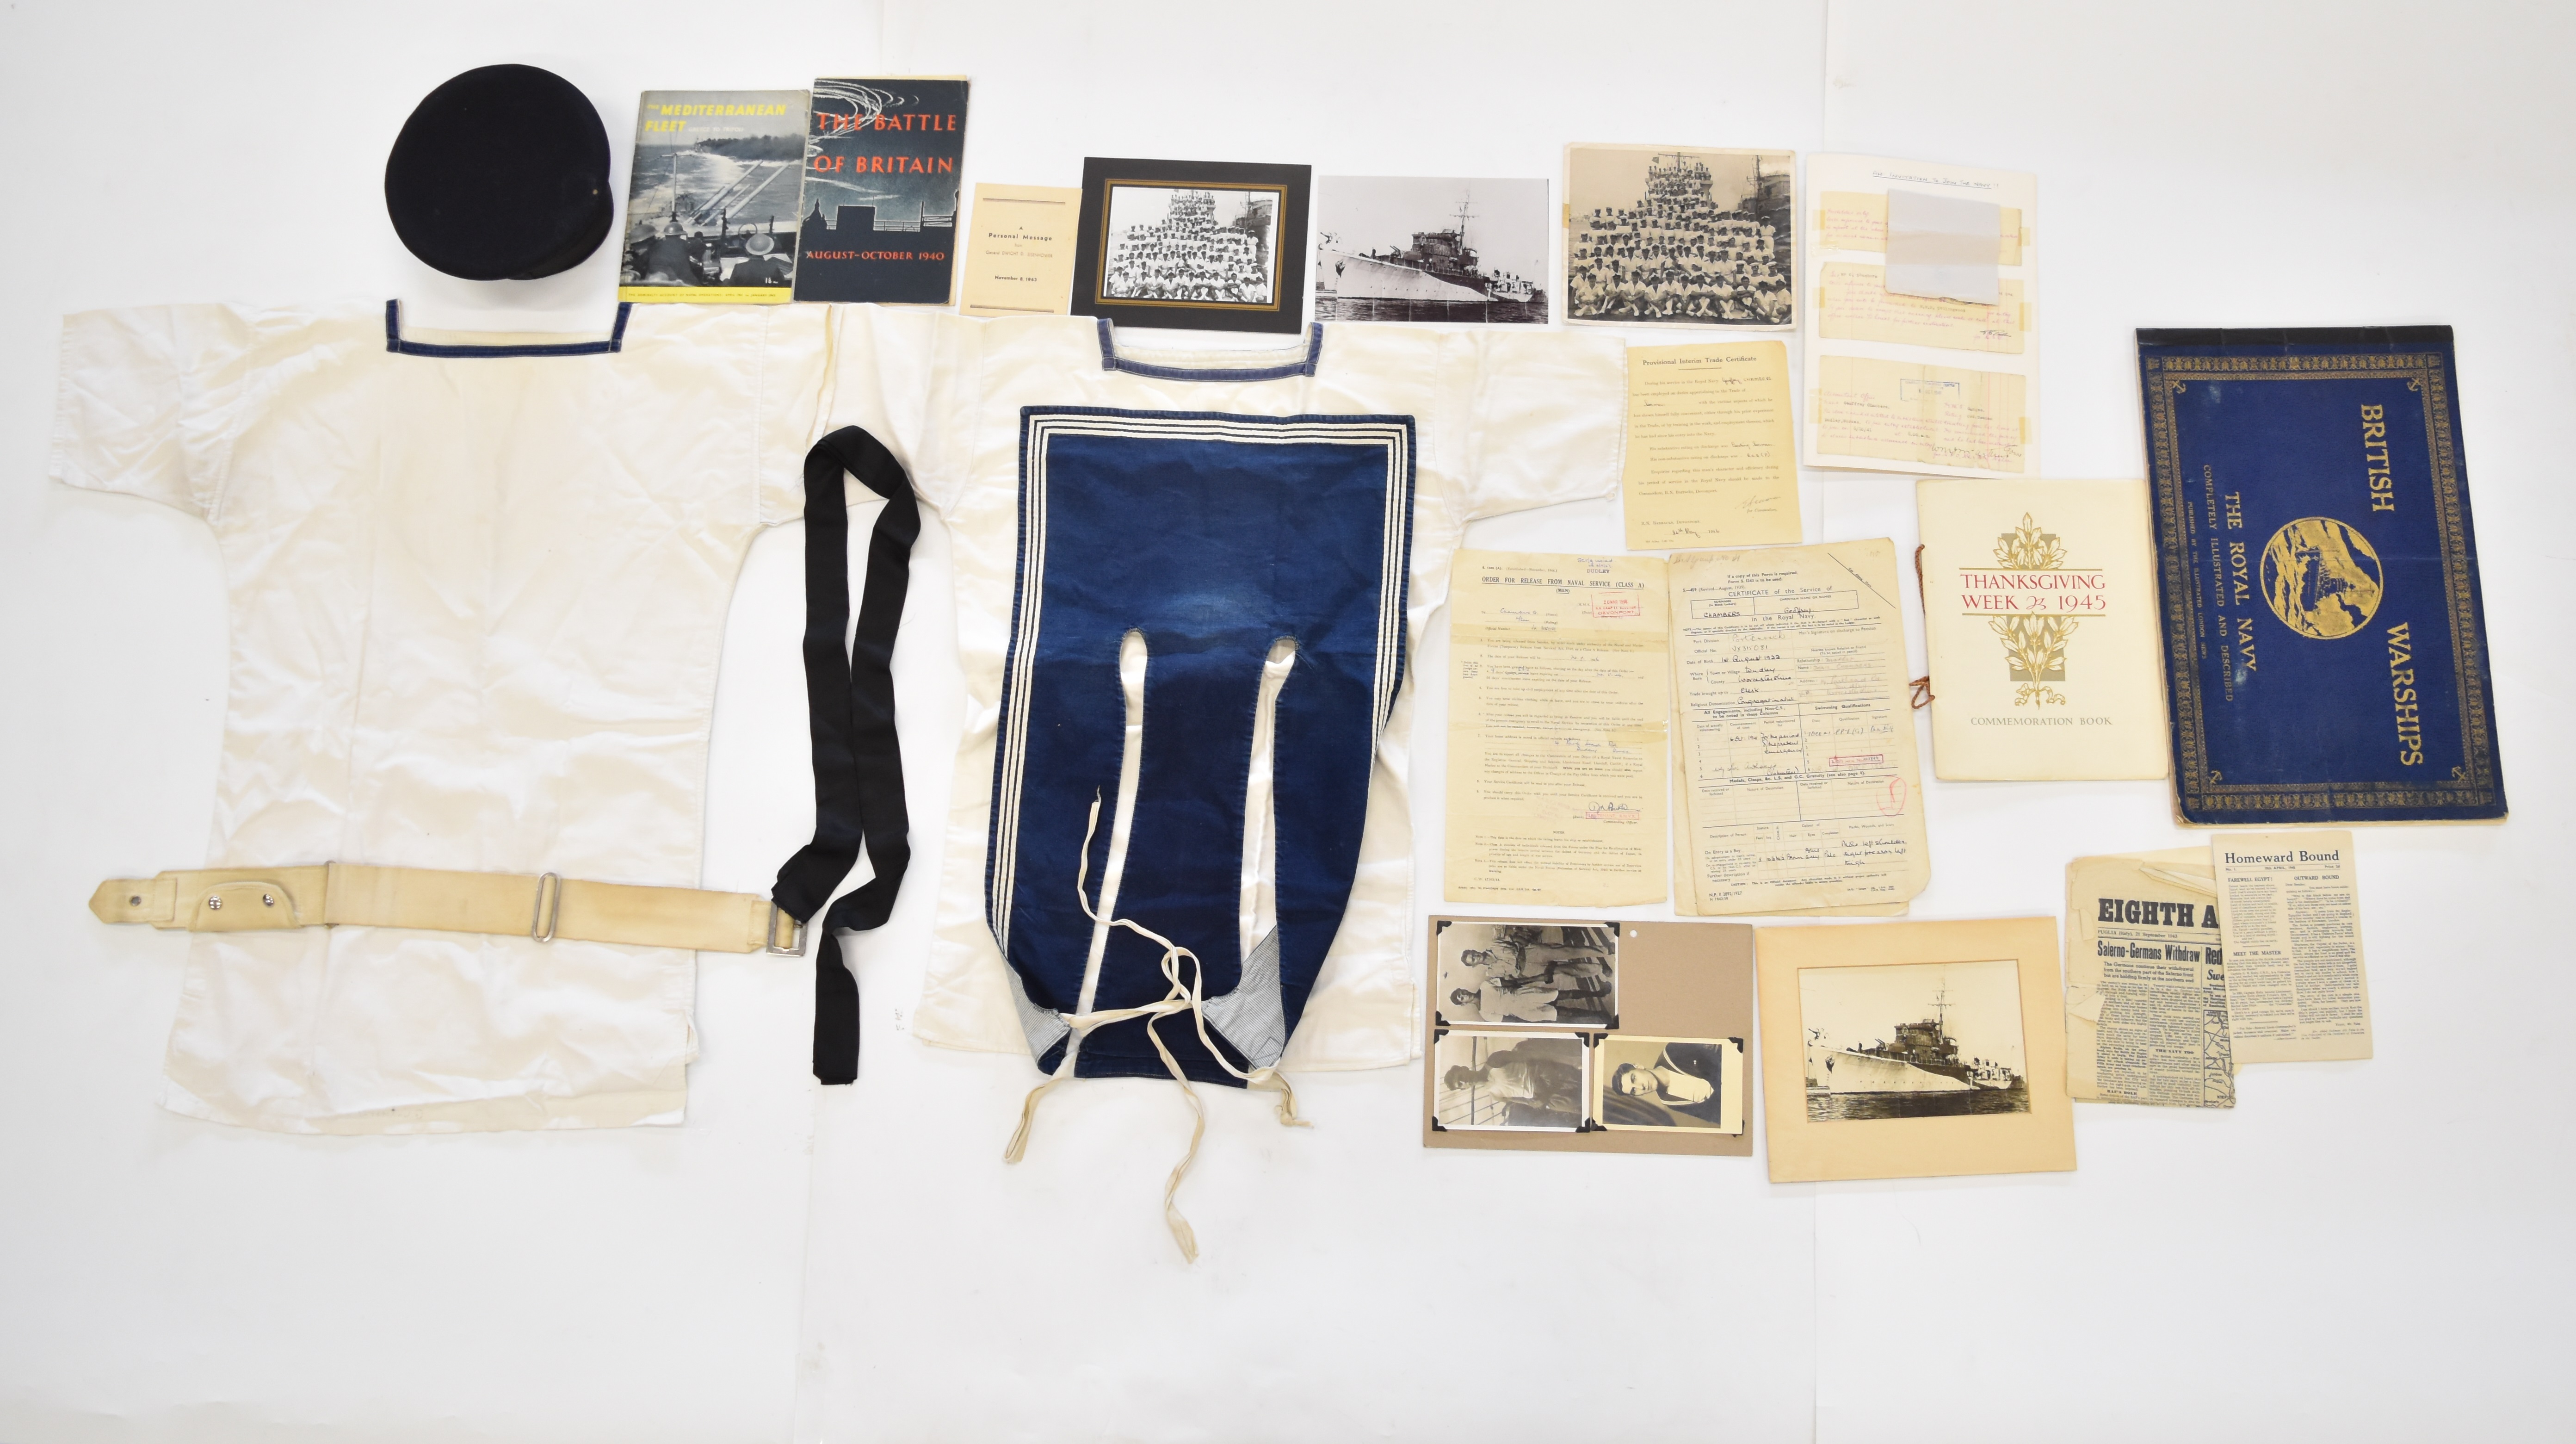 WW2 Royal Navy interest ephemera and documentation for Geoffrey Chambers including Certificate of